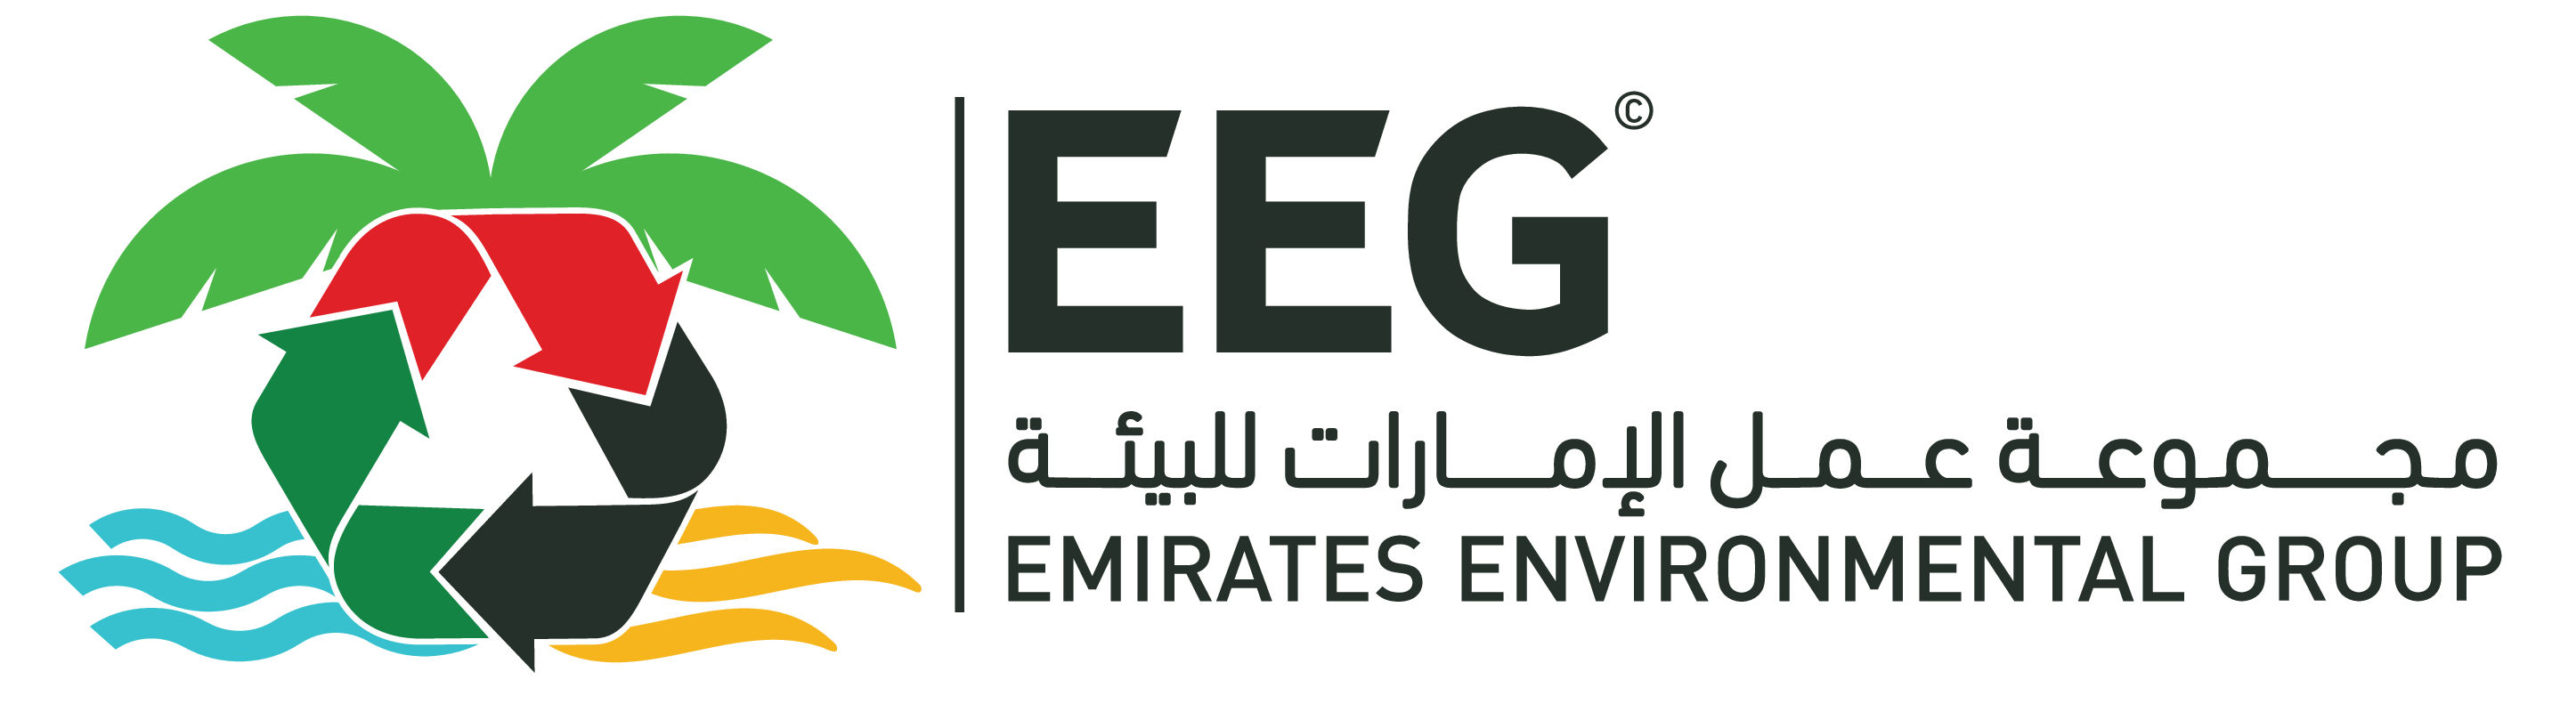 Image for Under The Patronage Of The UAE Ministry Of Climate Change And Environment